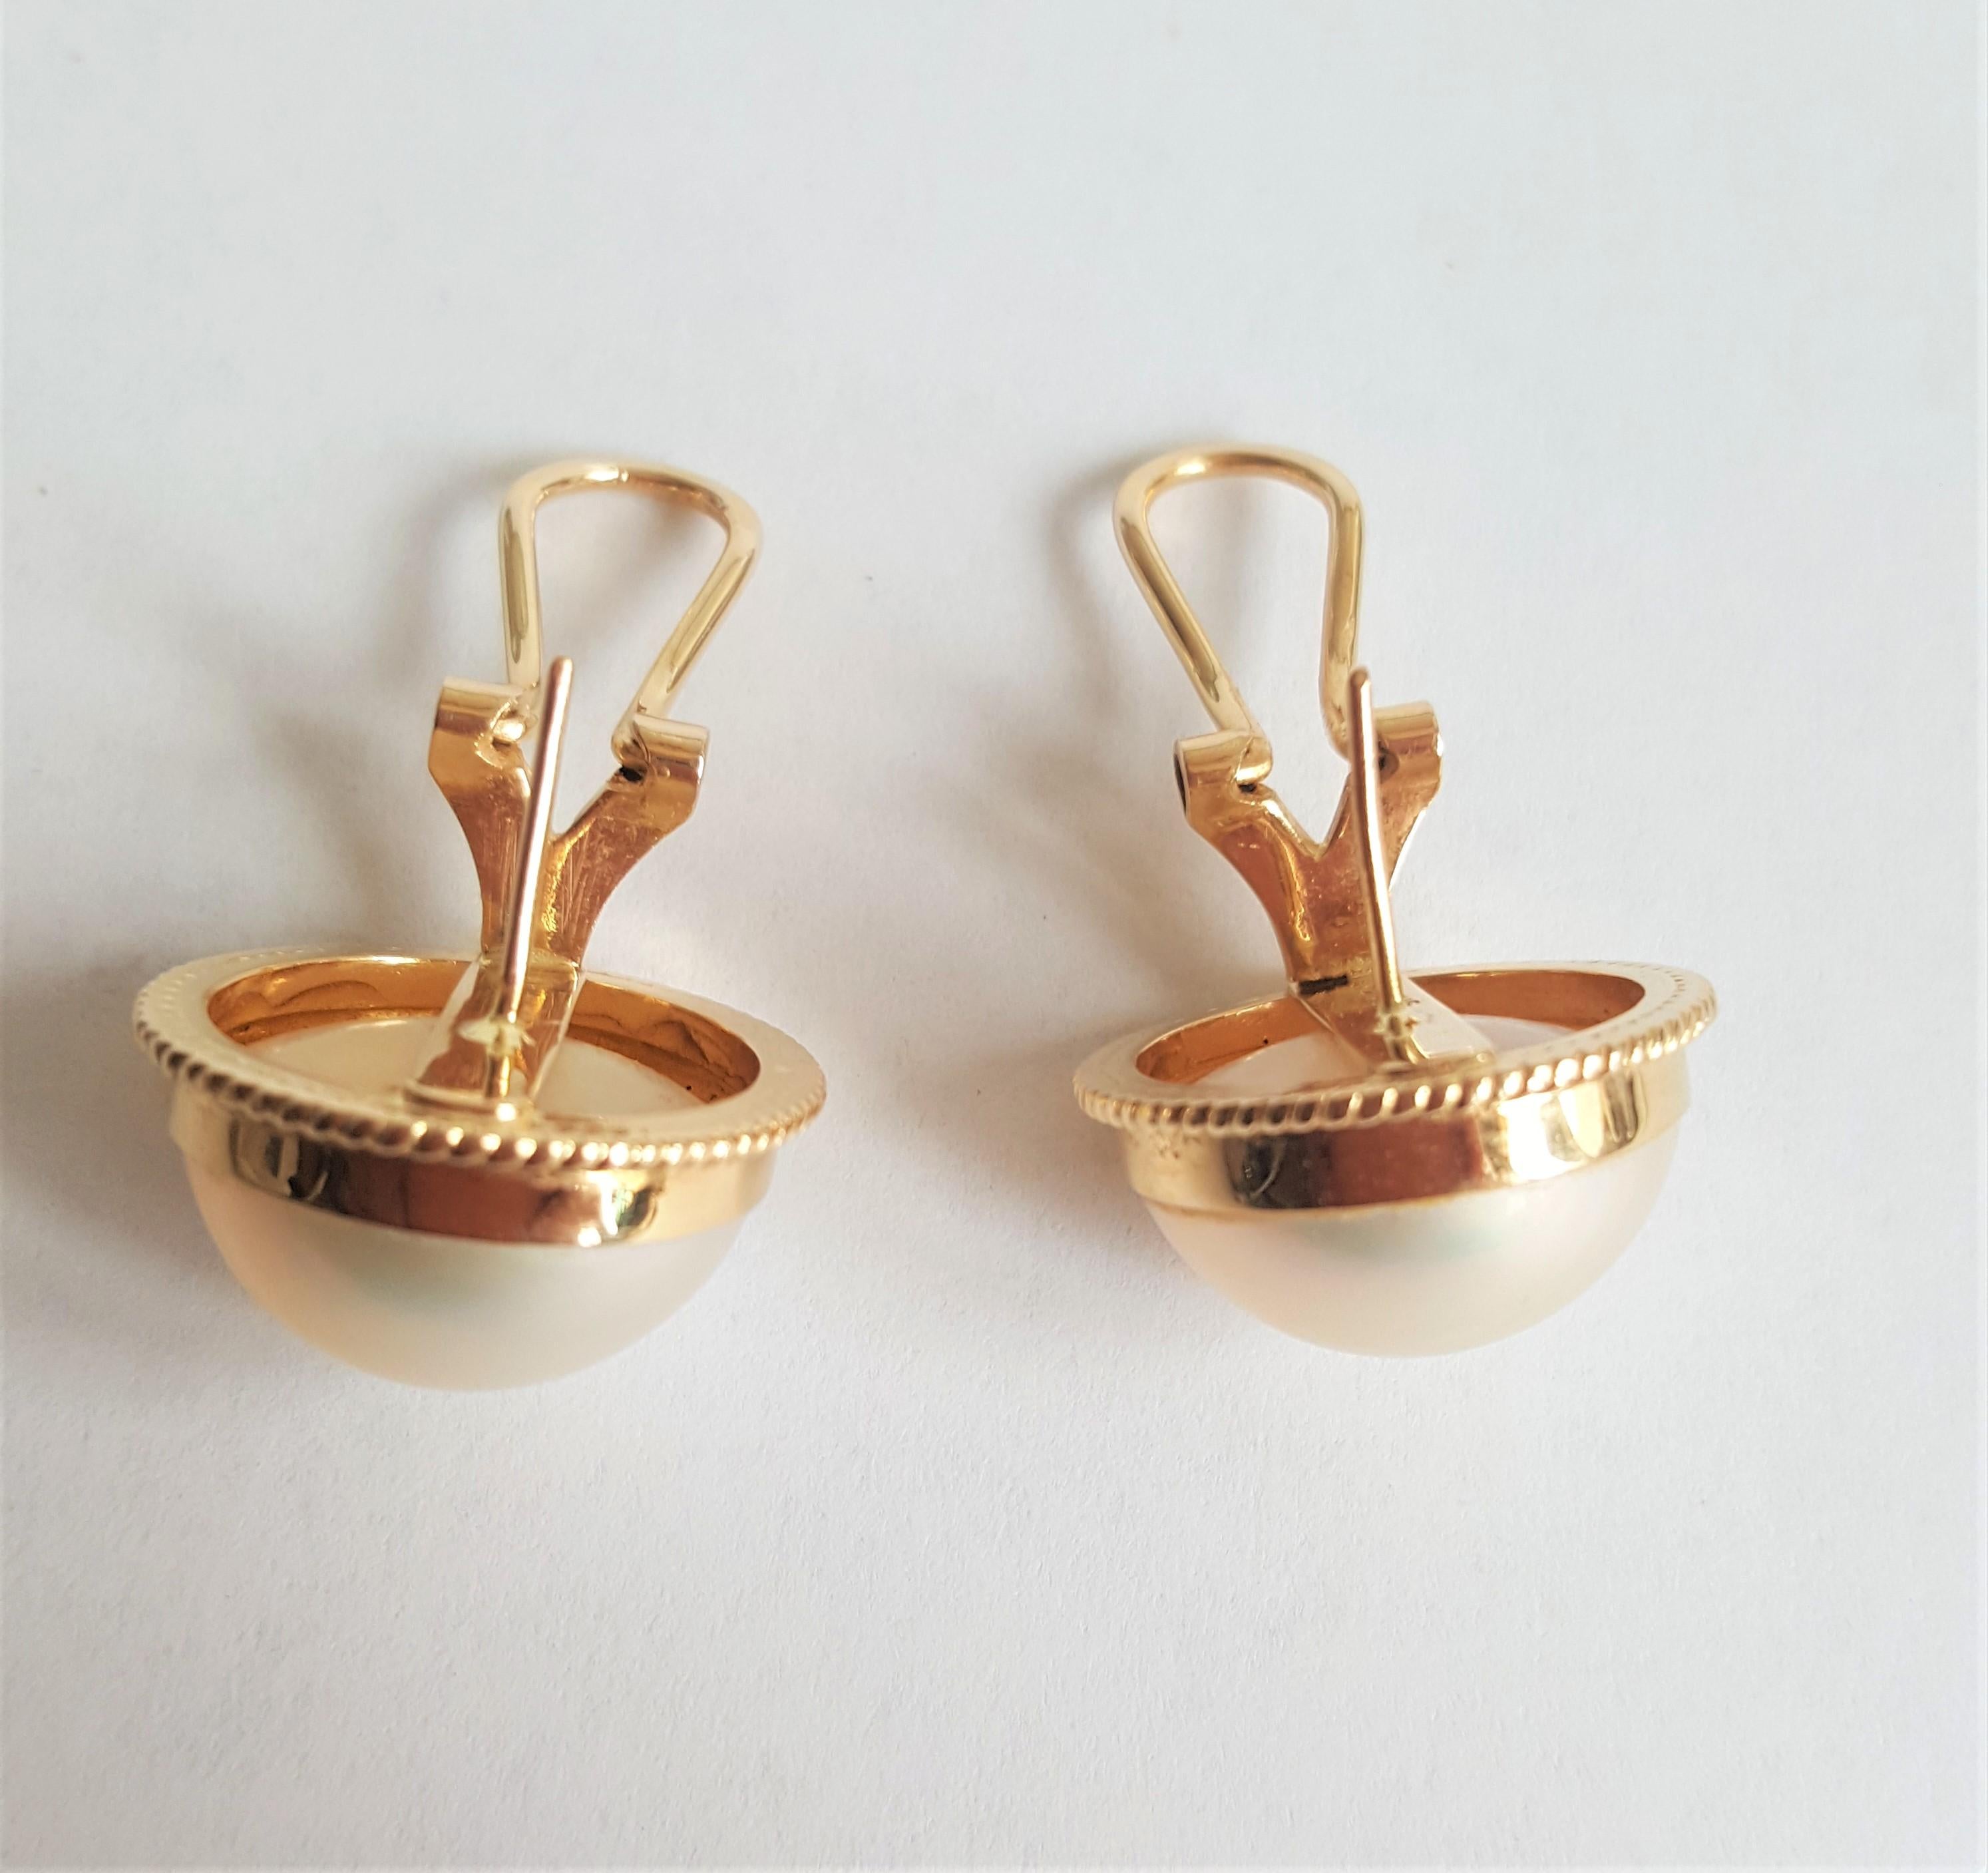 Beautiful 14kt yellow gold white mabe pearl earrings made by designer WAHING; they have friction post and are secured with omega backings. The pearls are in very nice condition and have a clean nacre. The earrings have a diameter of 18.5mm,  are